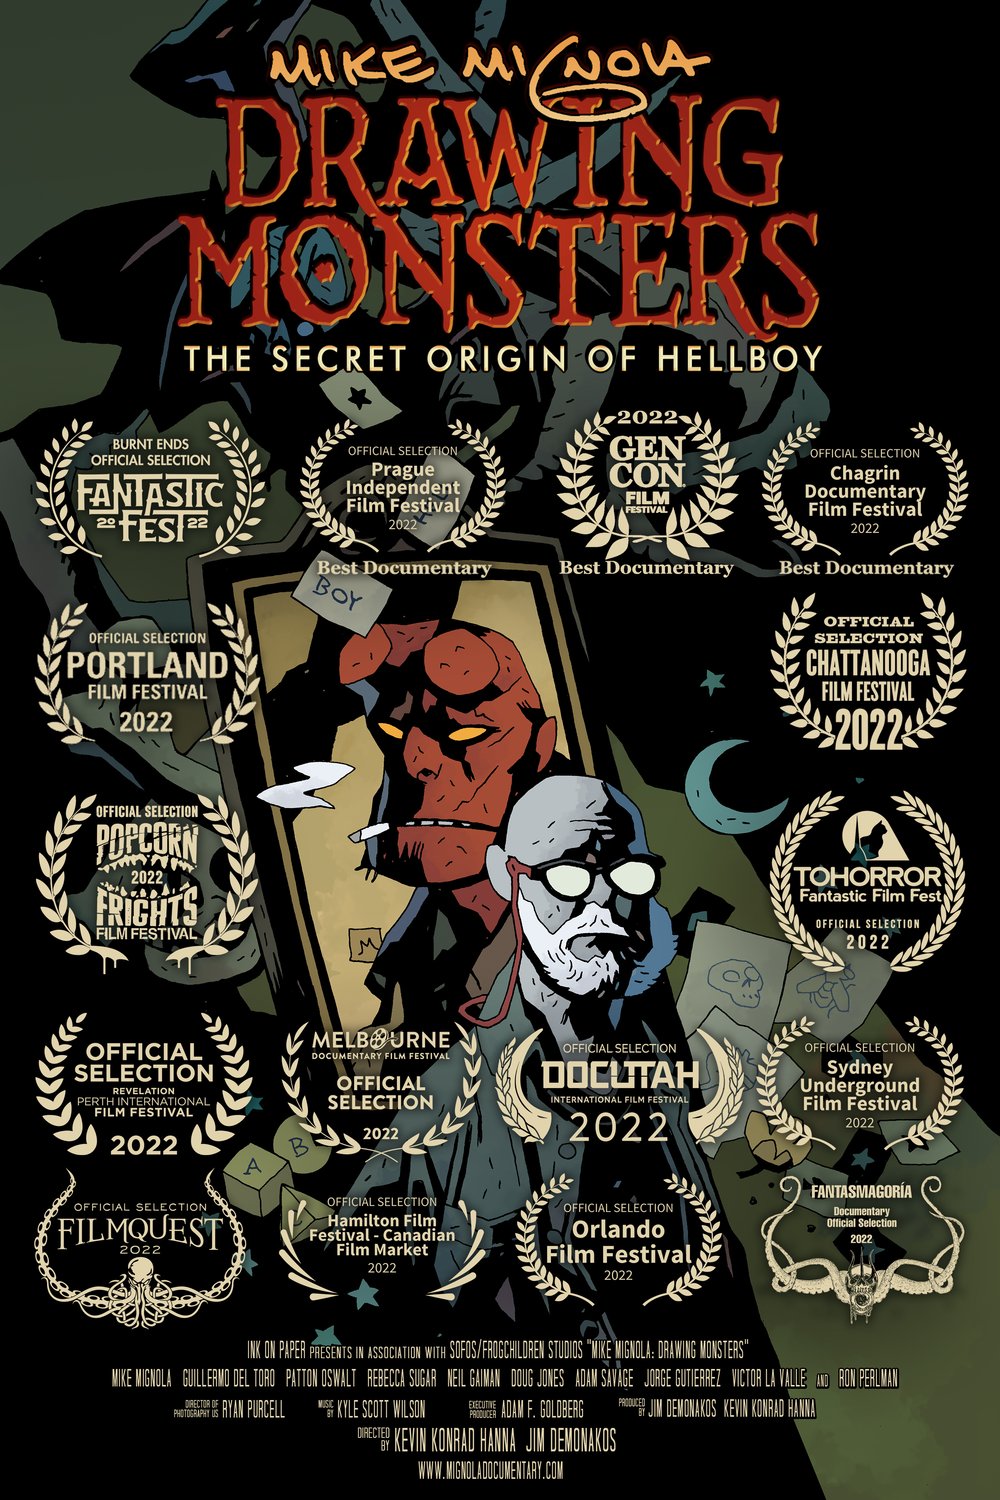 Poster of the movie Mike Mignola: Drawing Monsters